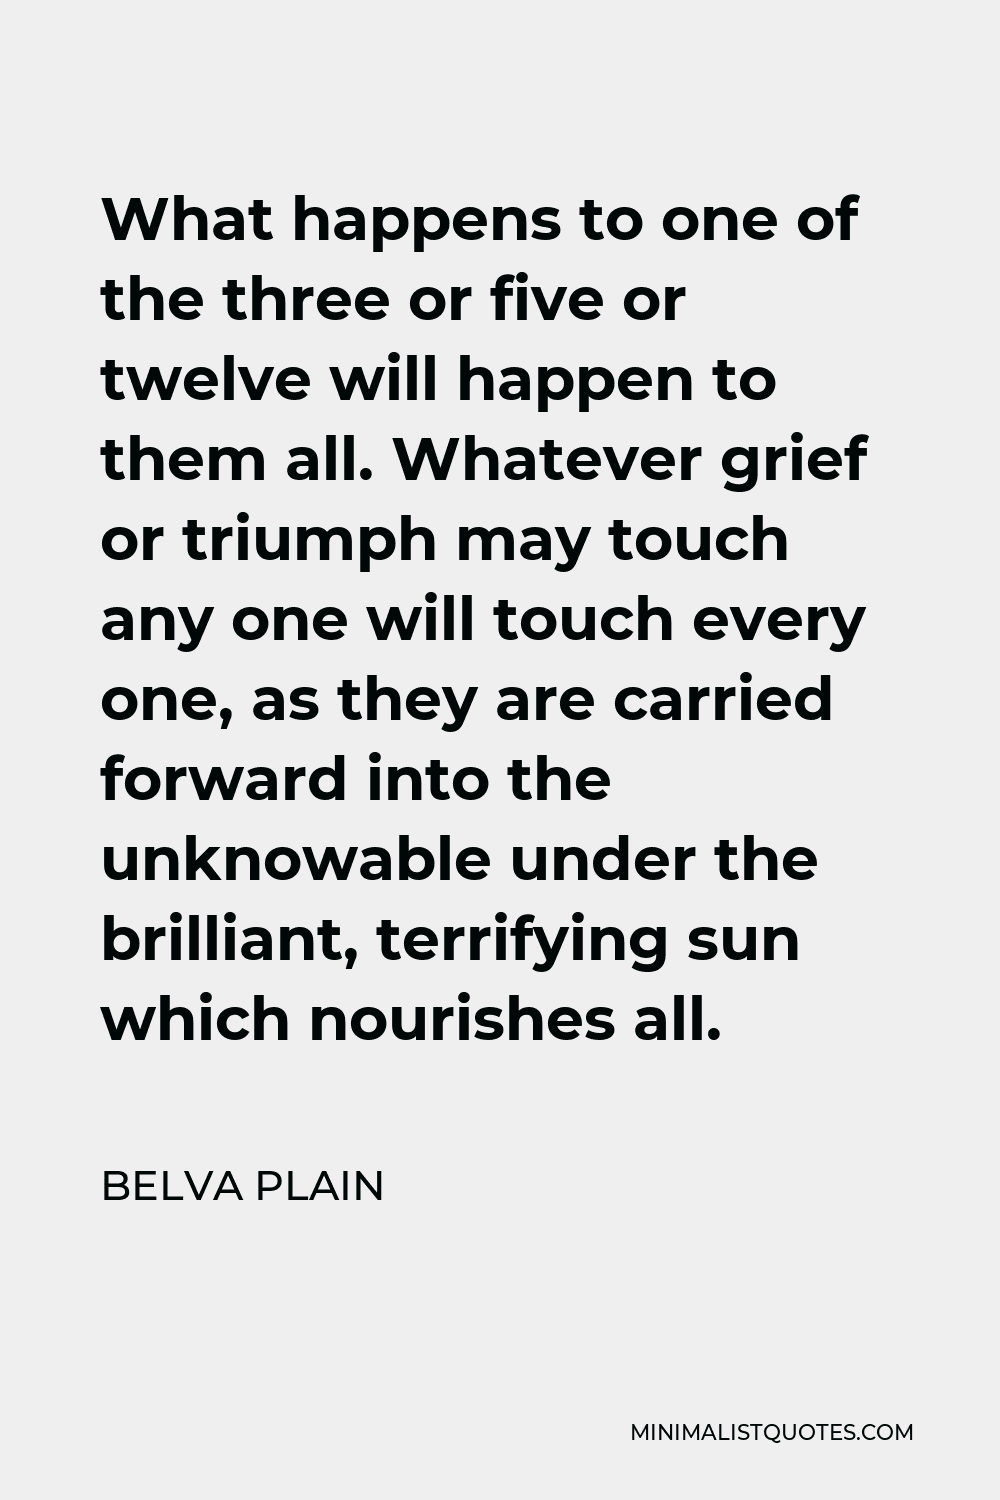 Belva Plain Quote - What happens to one of the three or five or twelve will happen to them all. Whatever grief or triumph may touch any one will touch every one, as they are carried forward into the unknowable under the brilliant, terrifying sun which nourishes all.